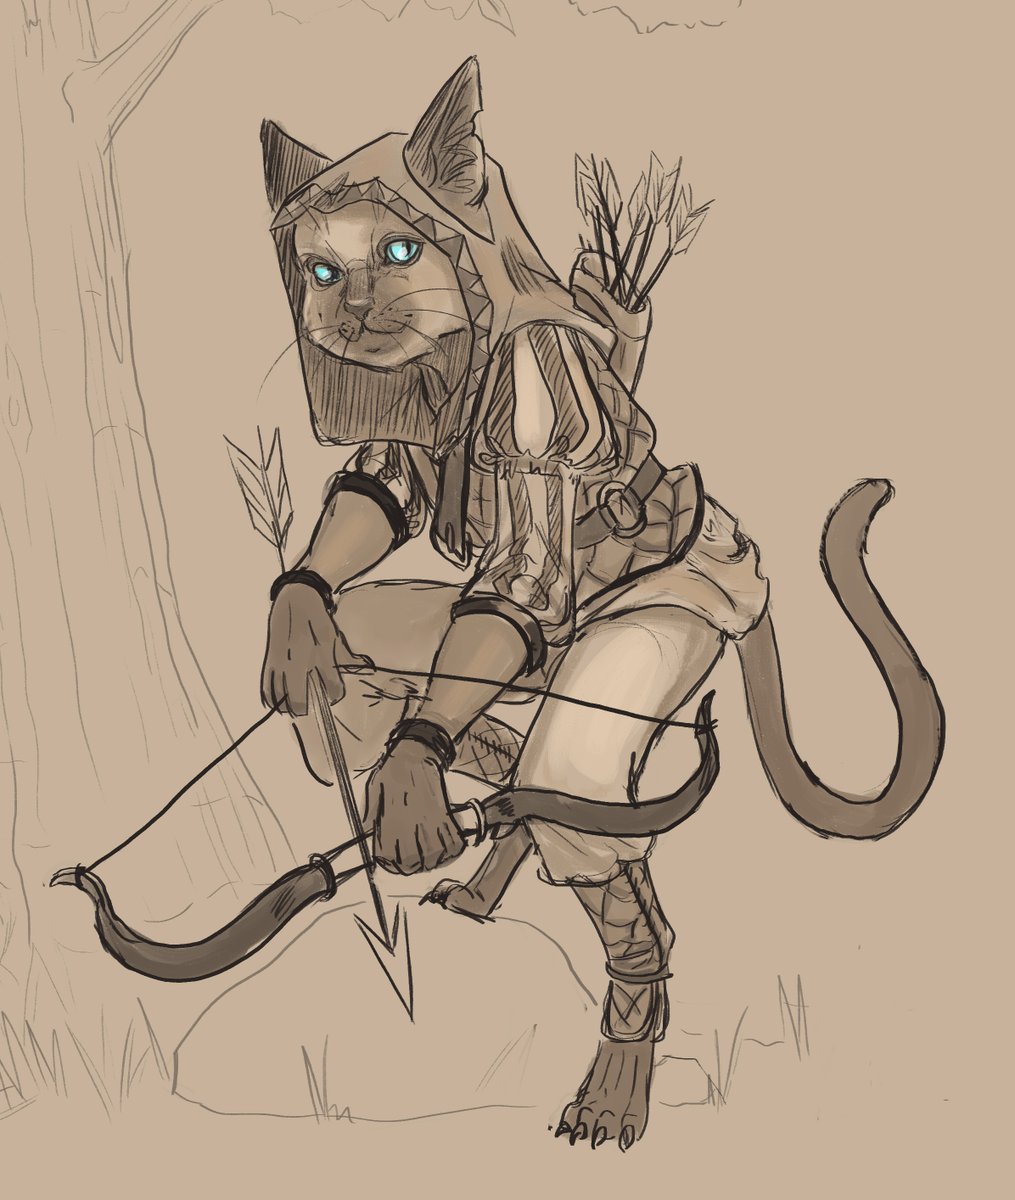 A little Tabaxi archer, inspired cat by my first pet, Sasha.